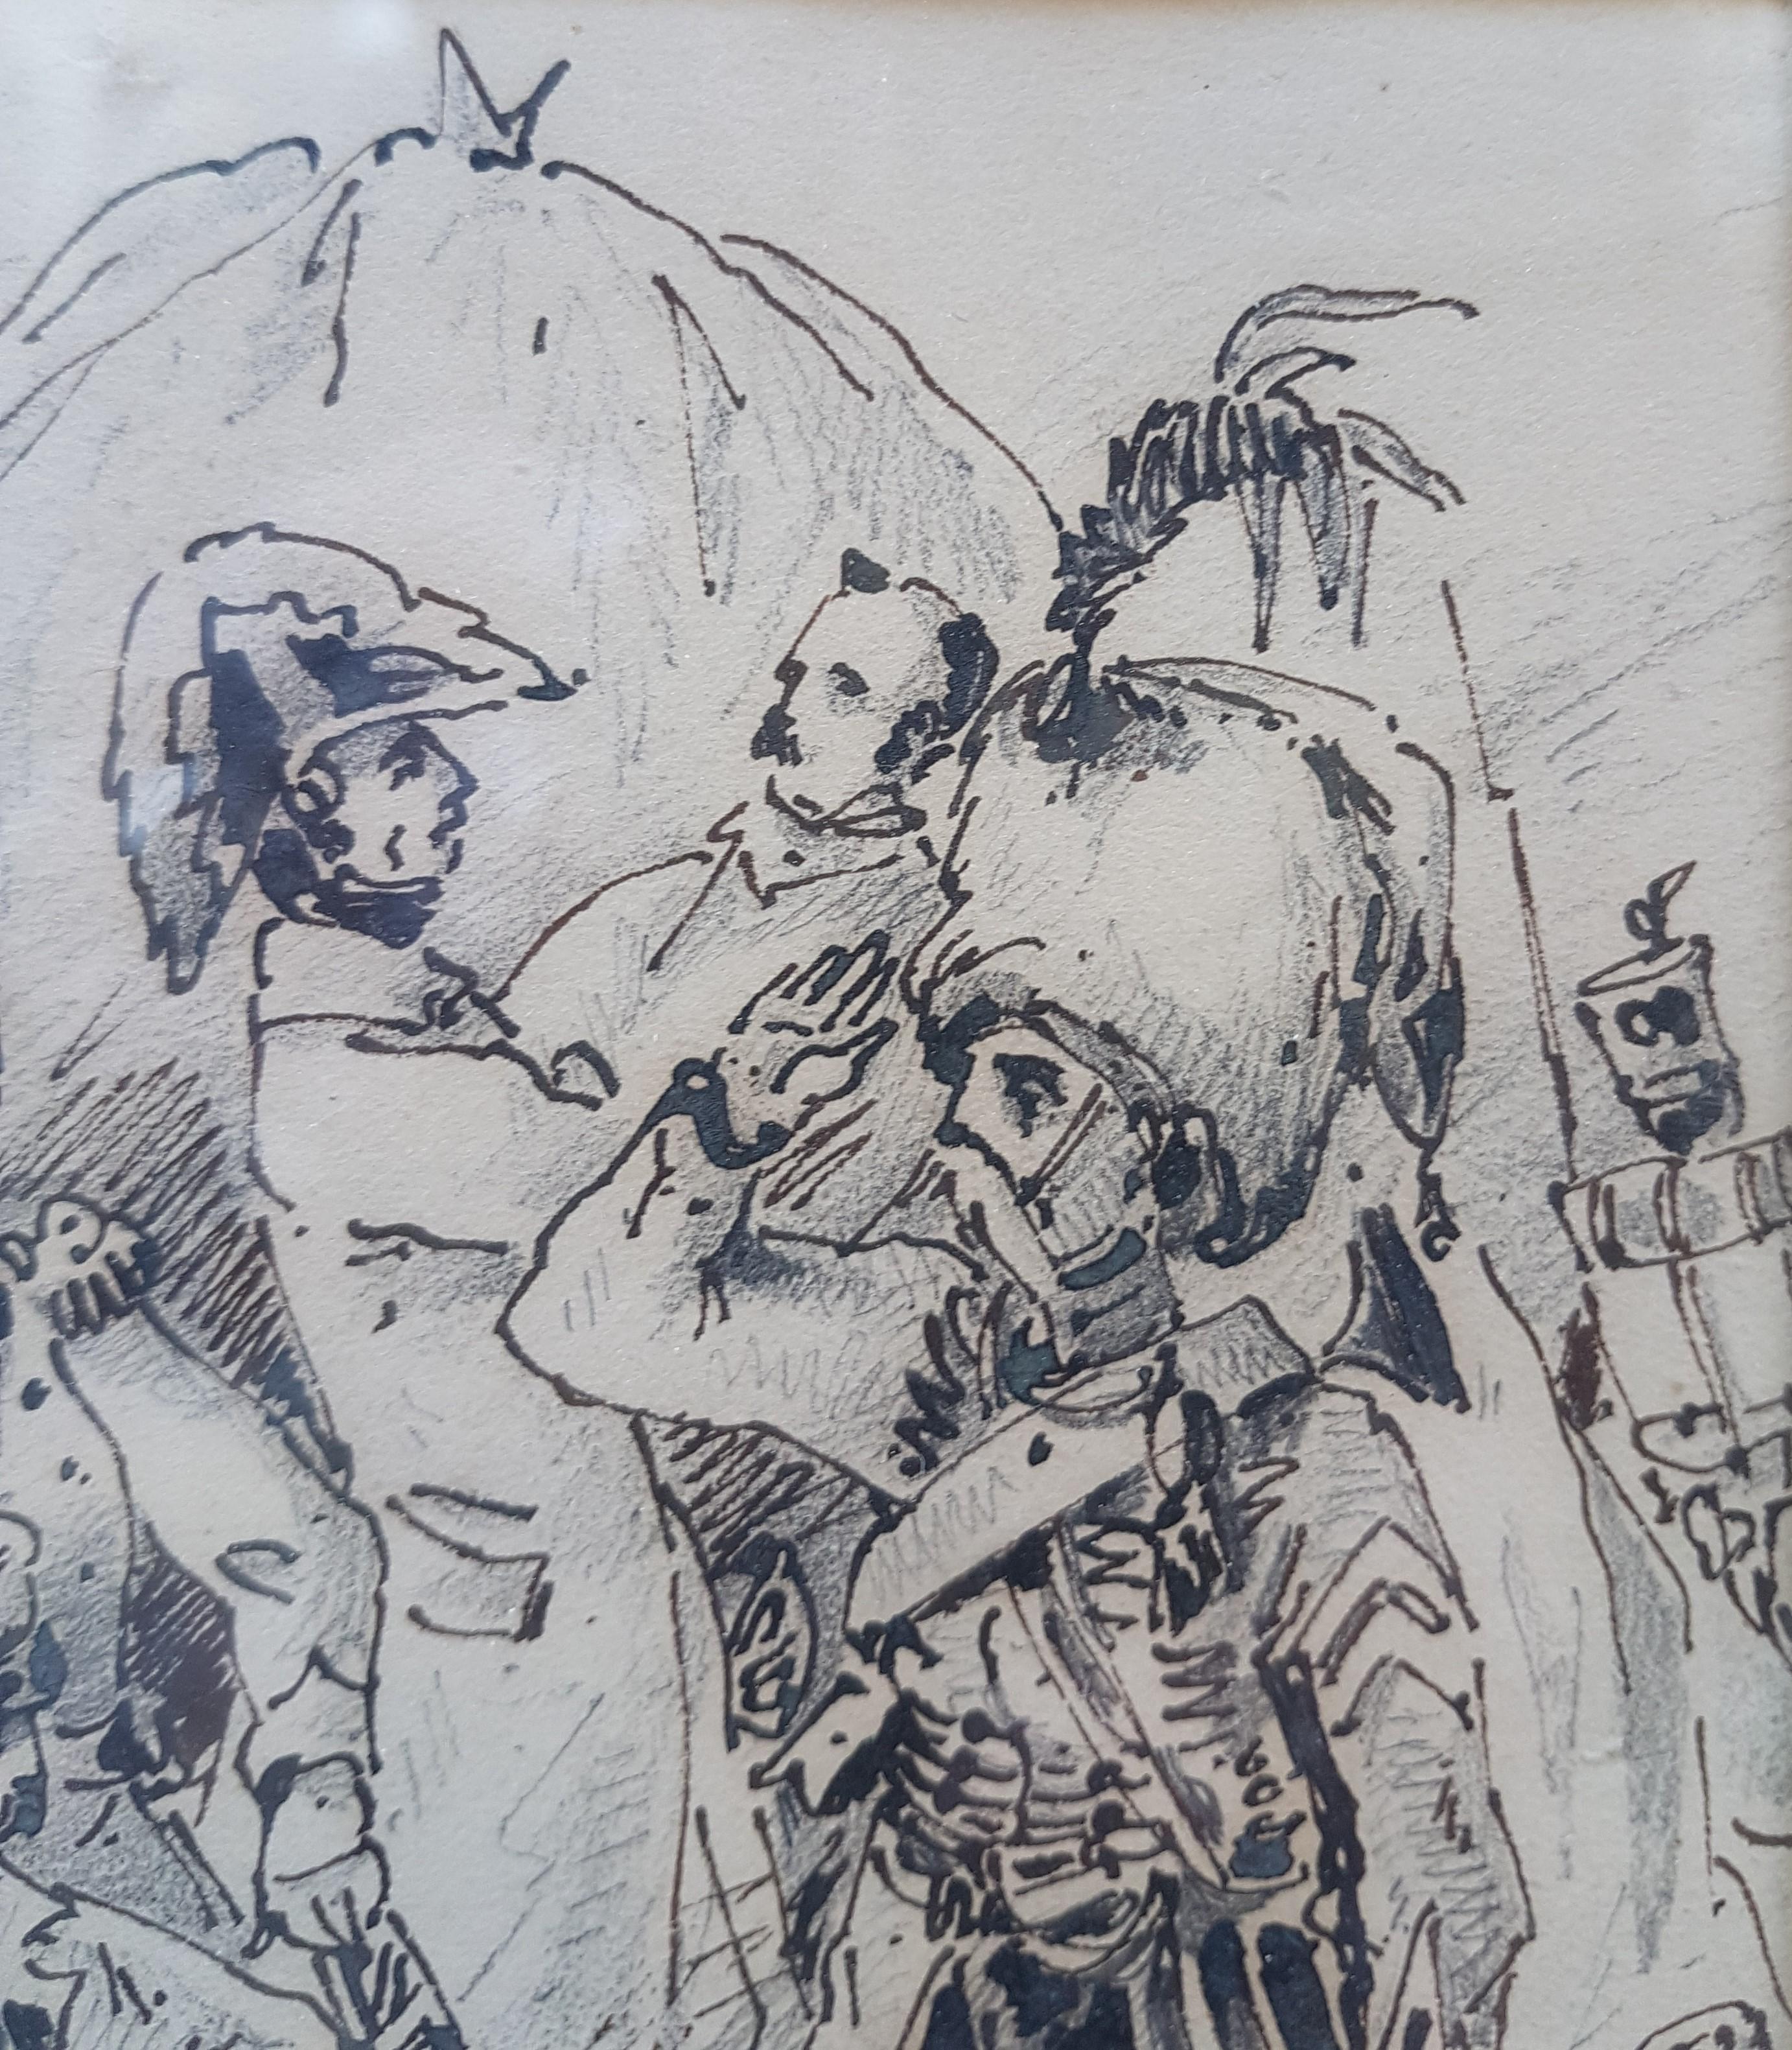 Military Drawing 19th Ink on paper Souvenir barrack officers 1830 July Monarchy  - Gray Figurative Art by Richard de Querelle